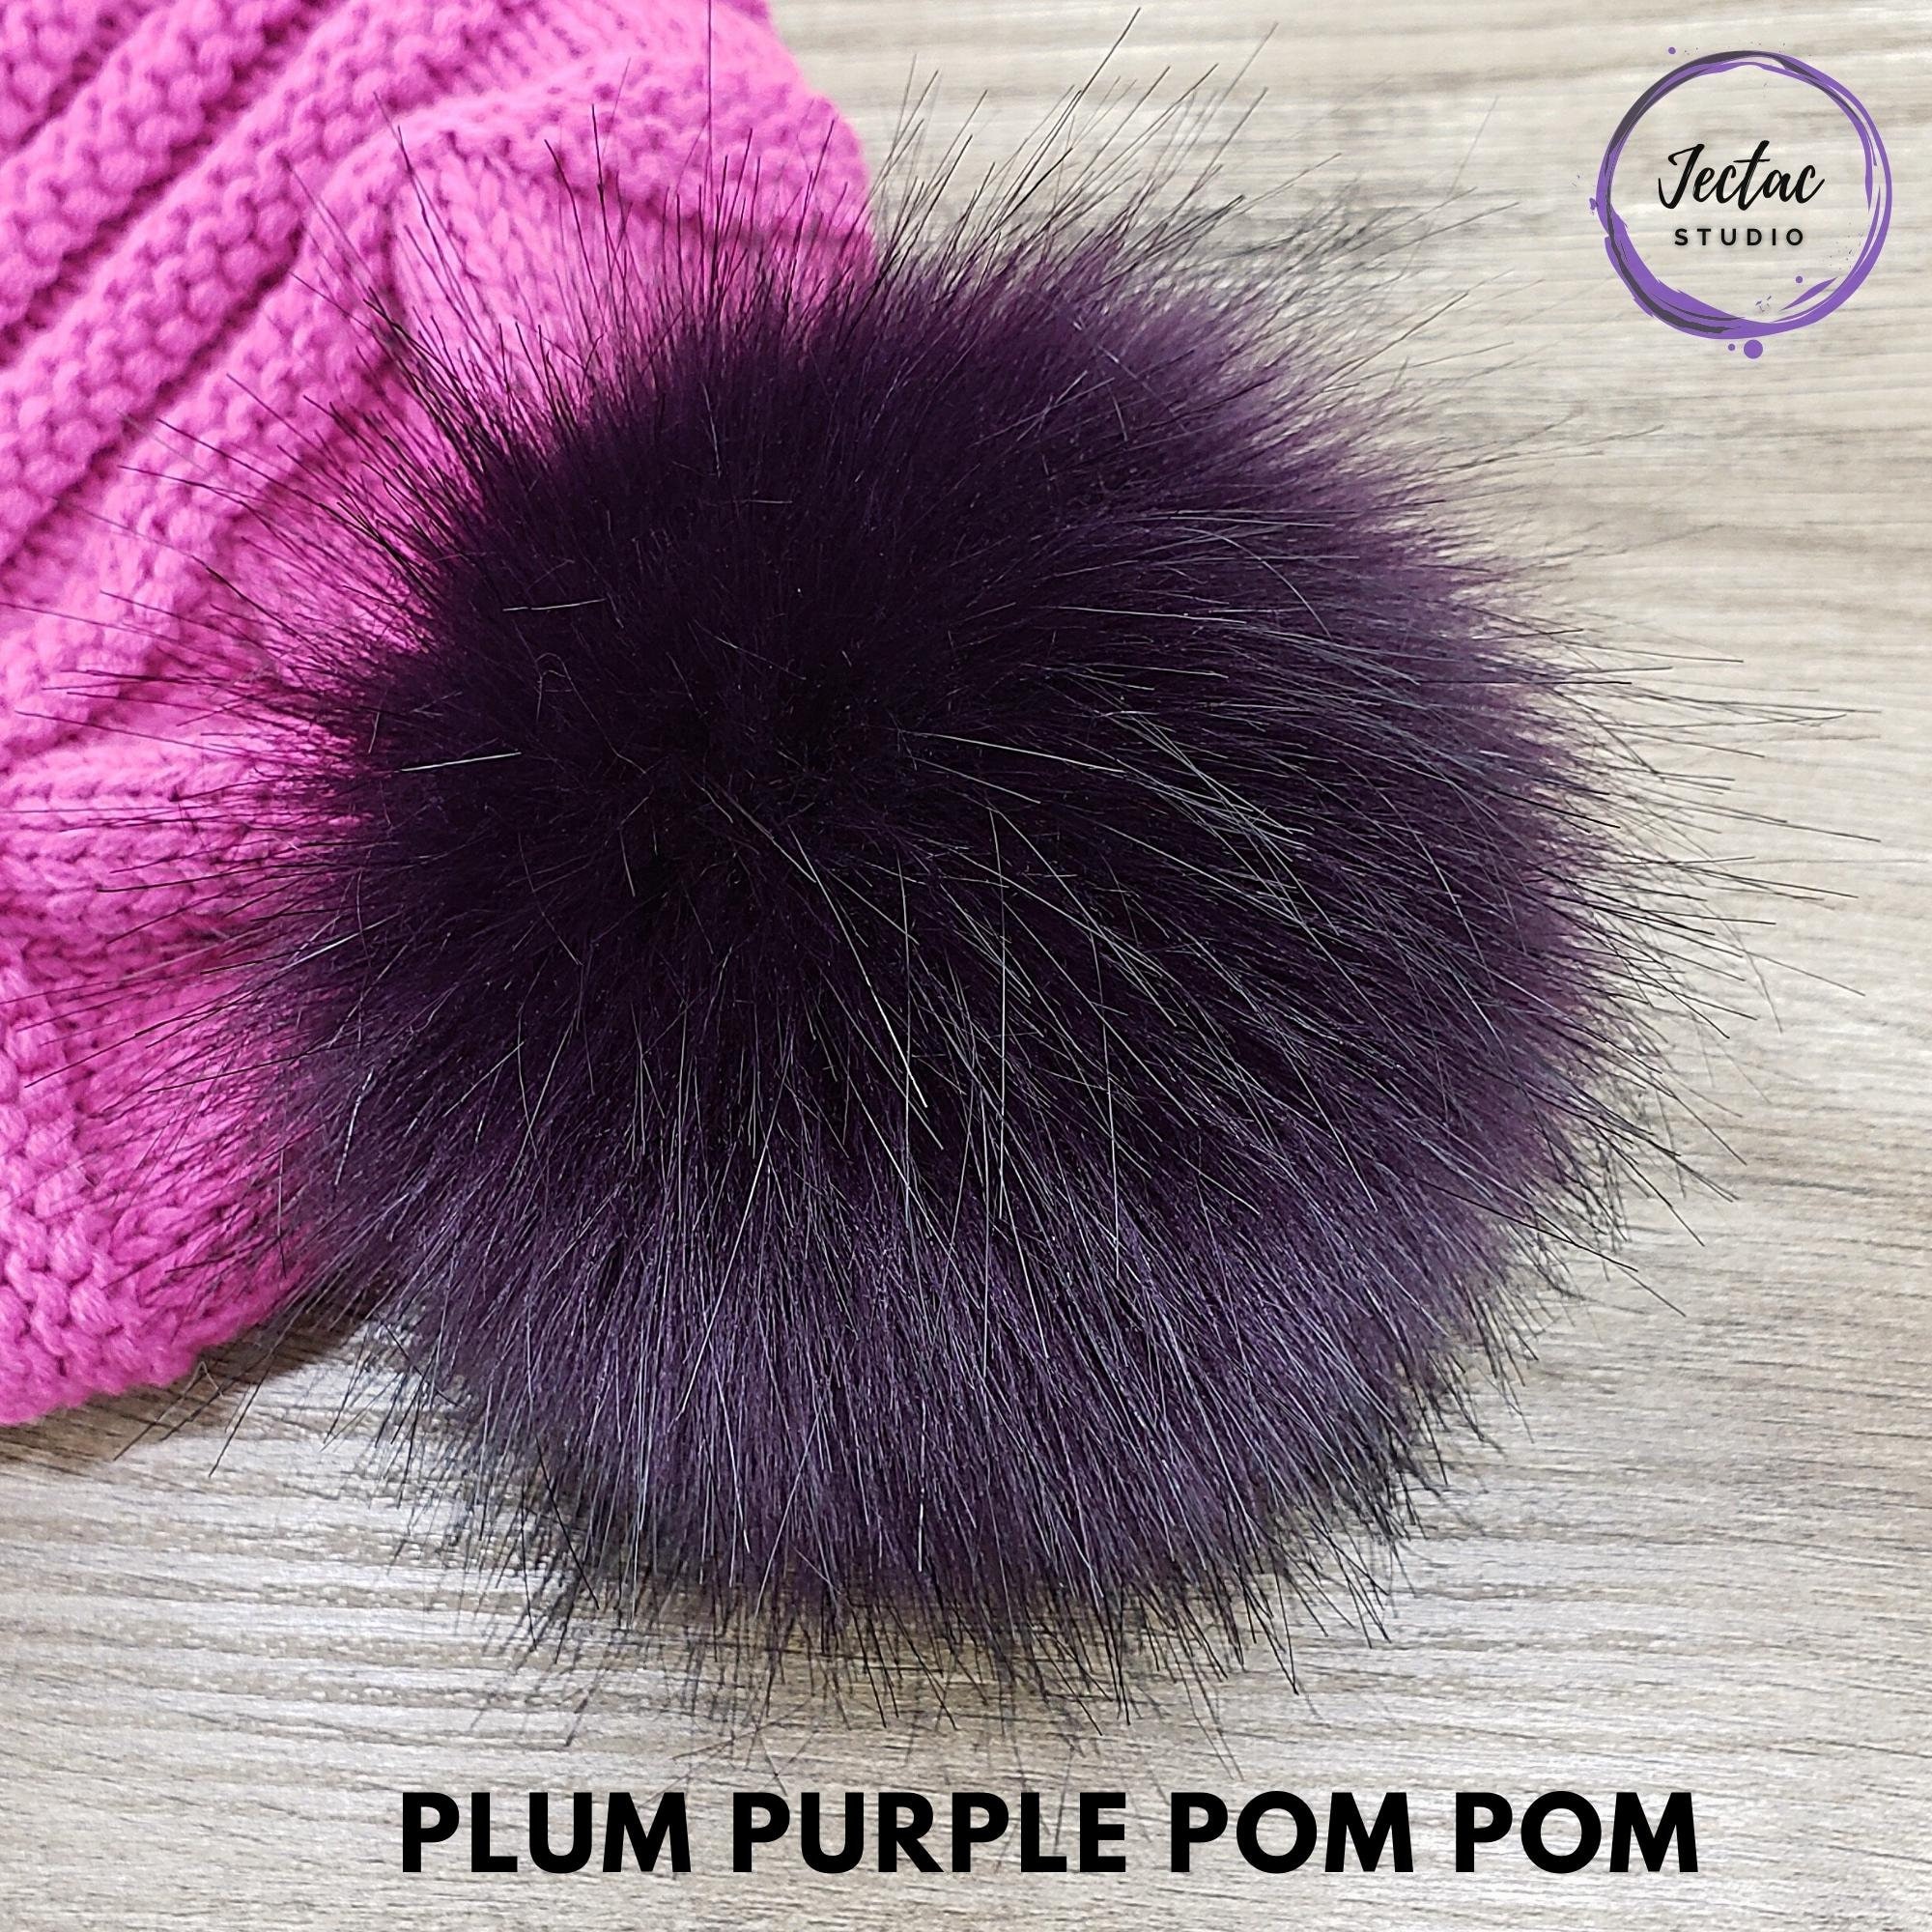 Mauve Pink Faux Fur Pom Poms for Knitted Beanies Hats and Crafts 4 Inch  Medium Size Light Pink Fake Fur Poms With Snaps Loops or Tie Strings 